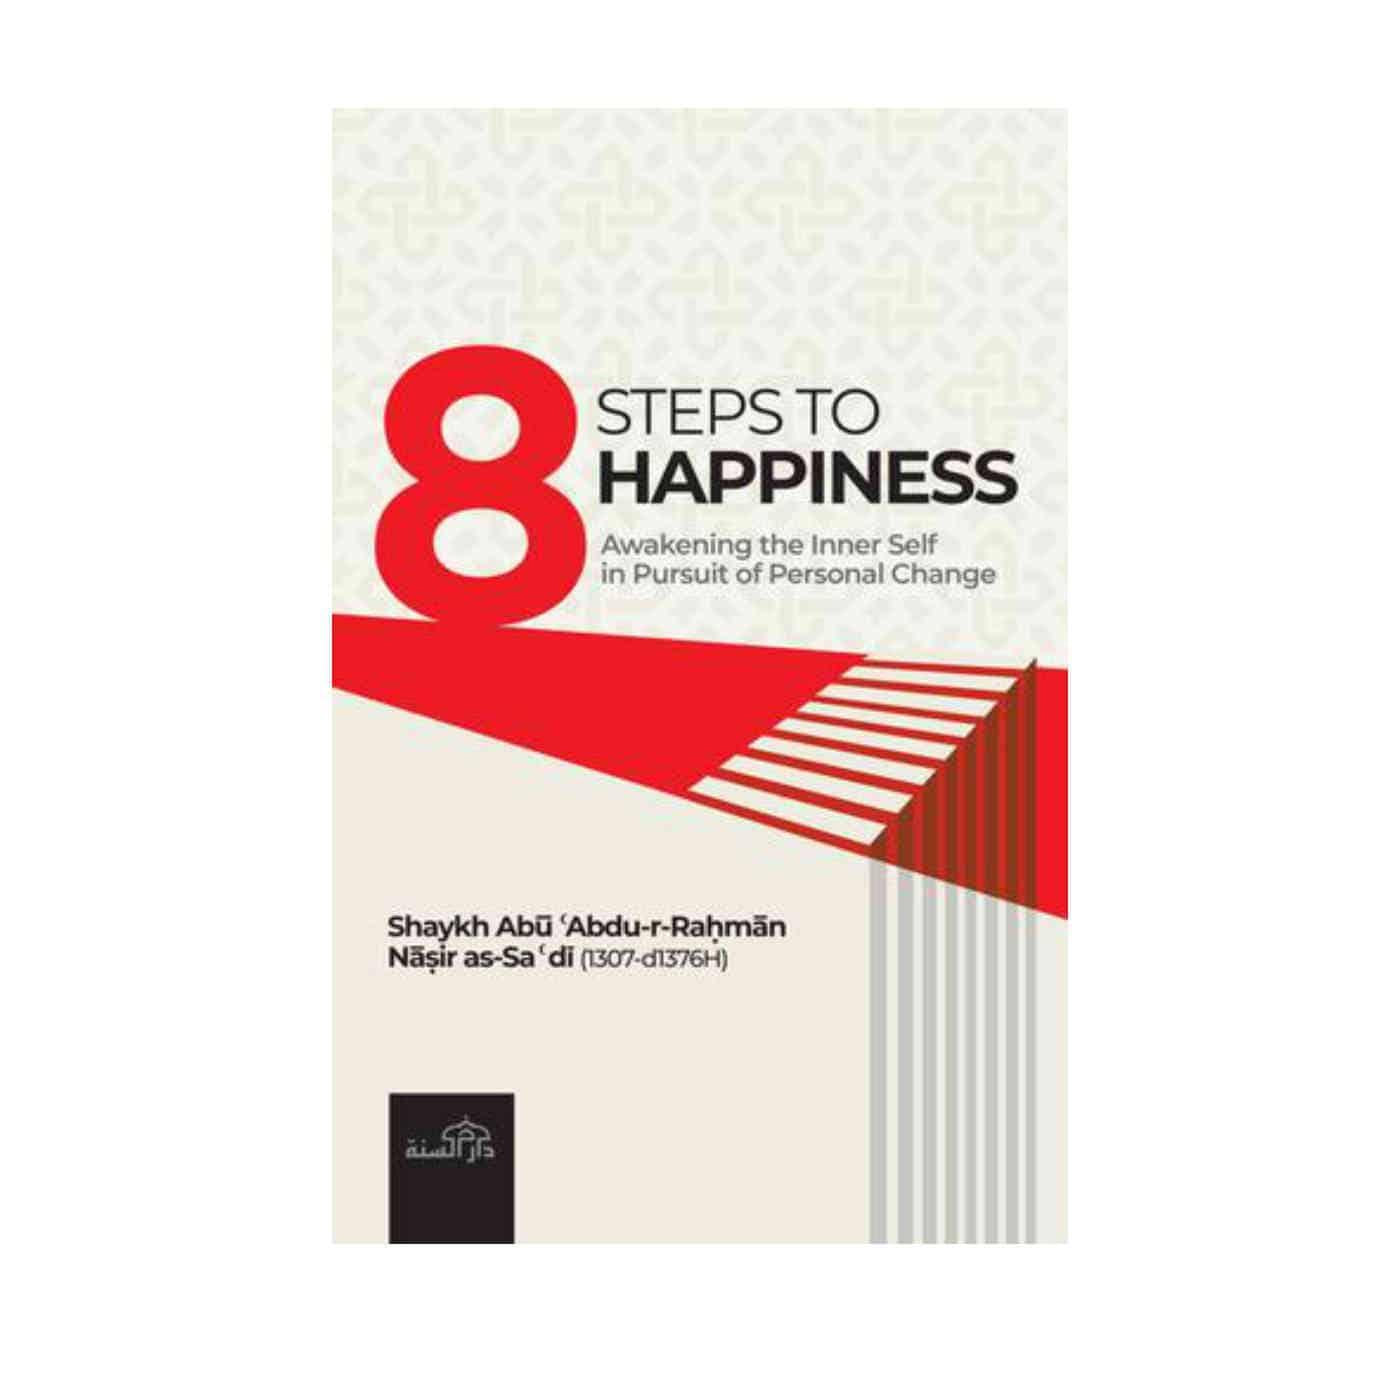 8 Steps To Happiness - Awakening the Inner Self in Pursuit of Personal Change